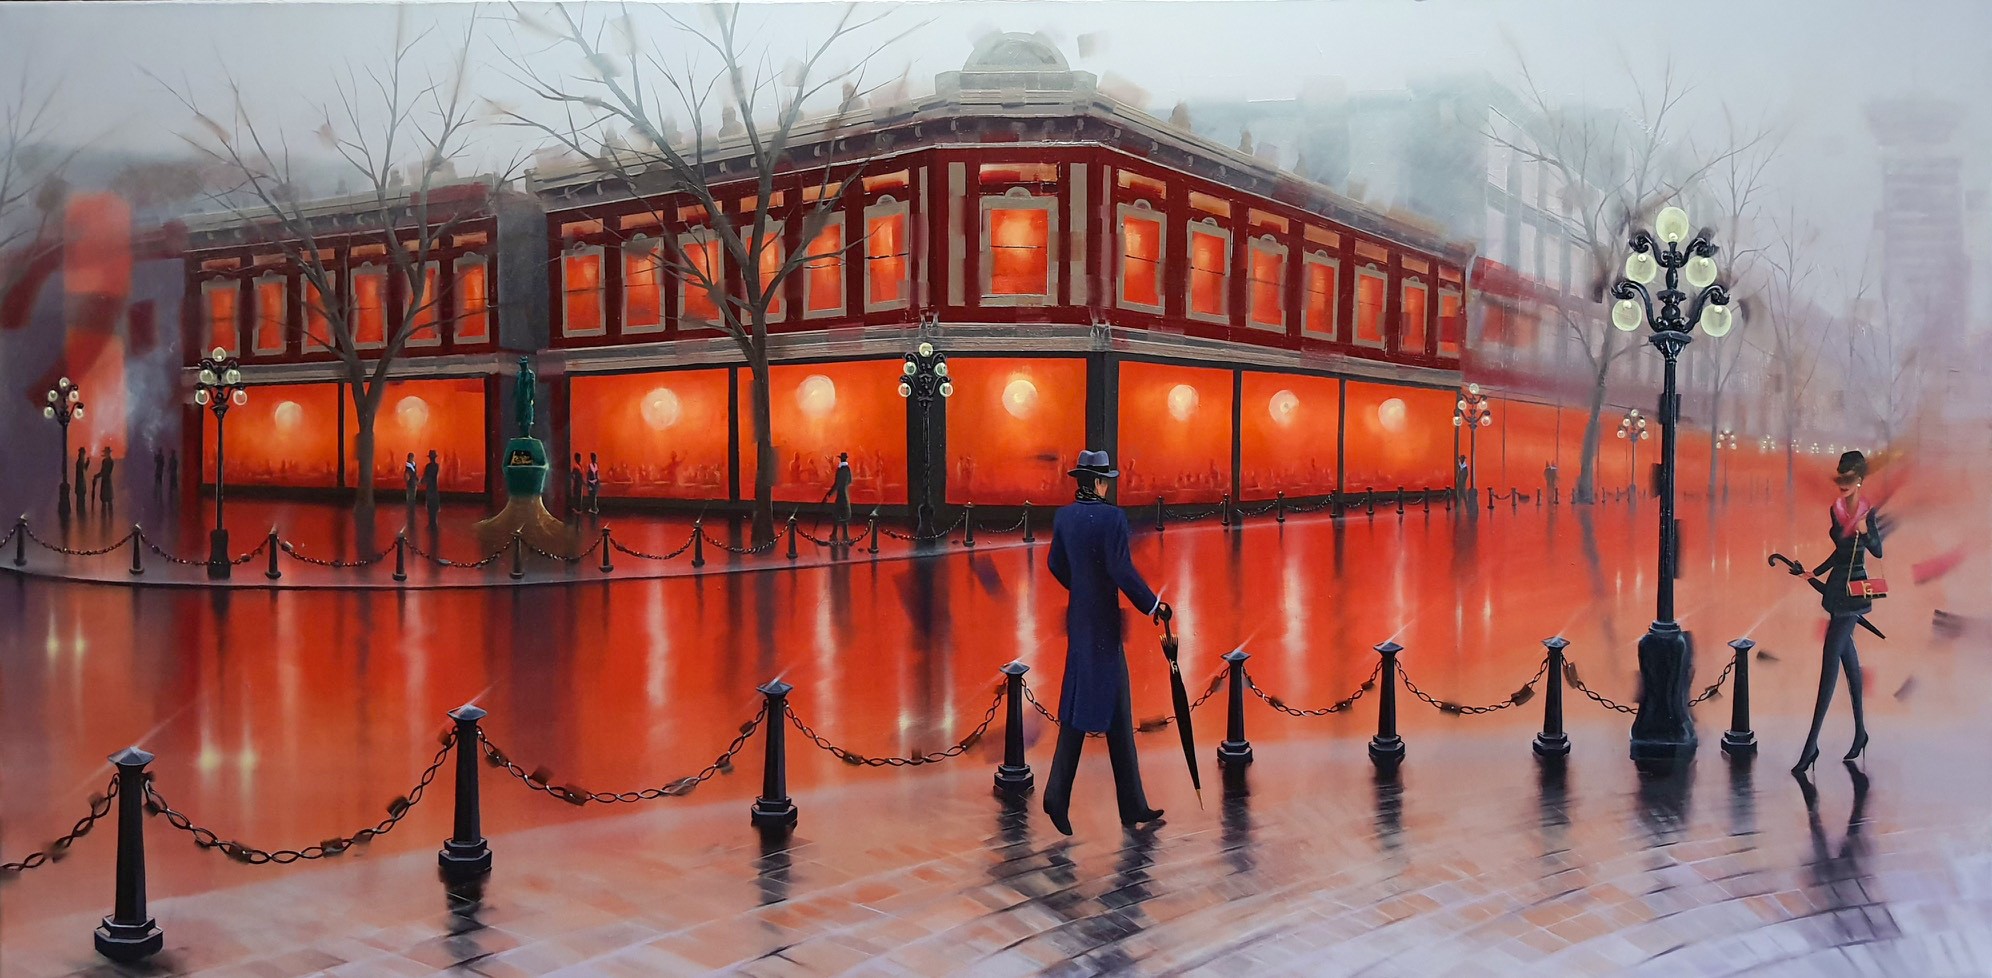 Contemporary art. Title: Gastown Reflection-Oil on canvas-24x48 in by Contemporary Canadian Artist Kamiar Gajoum.